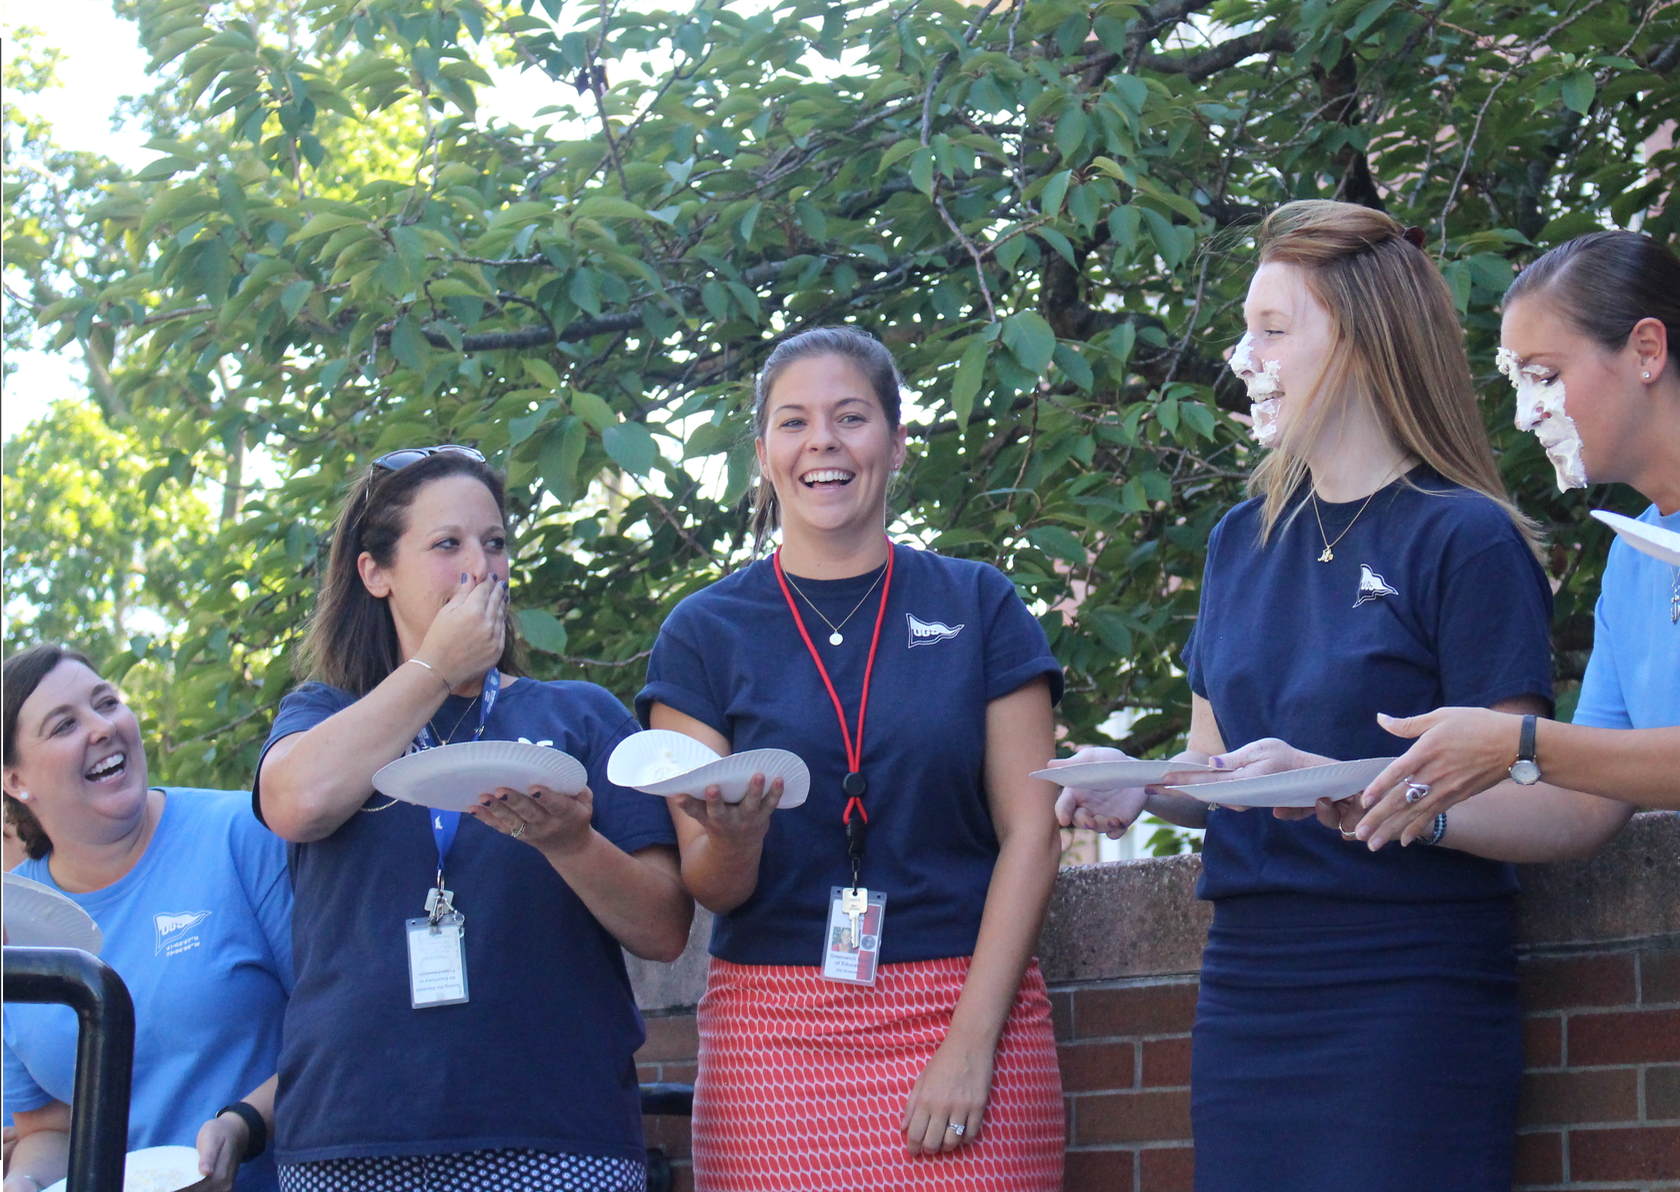 Teachers at Old Greenwich School participated in the pie smashing event on Sept. 22, 2017 Photo: Leslie Yager